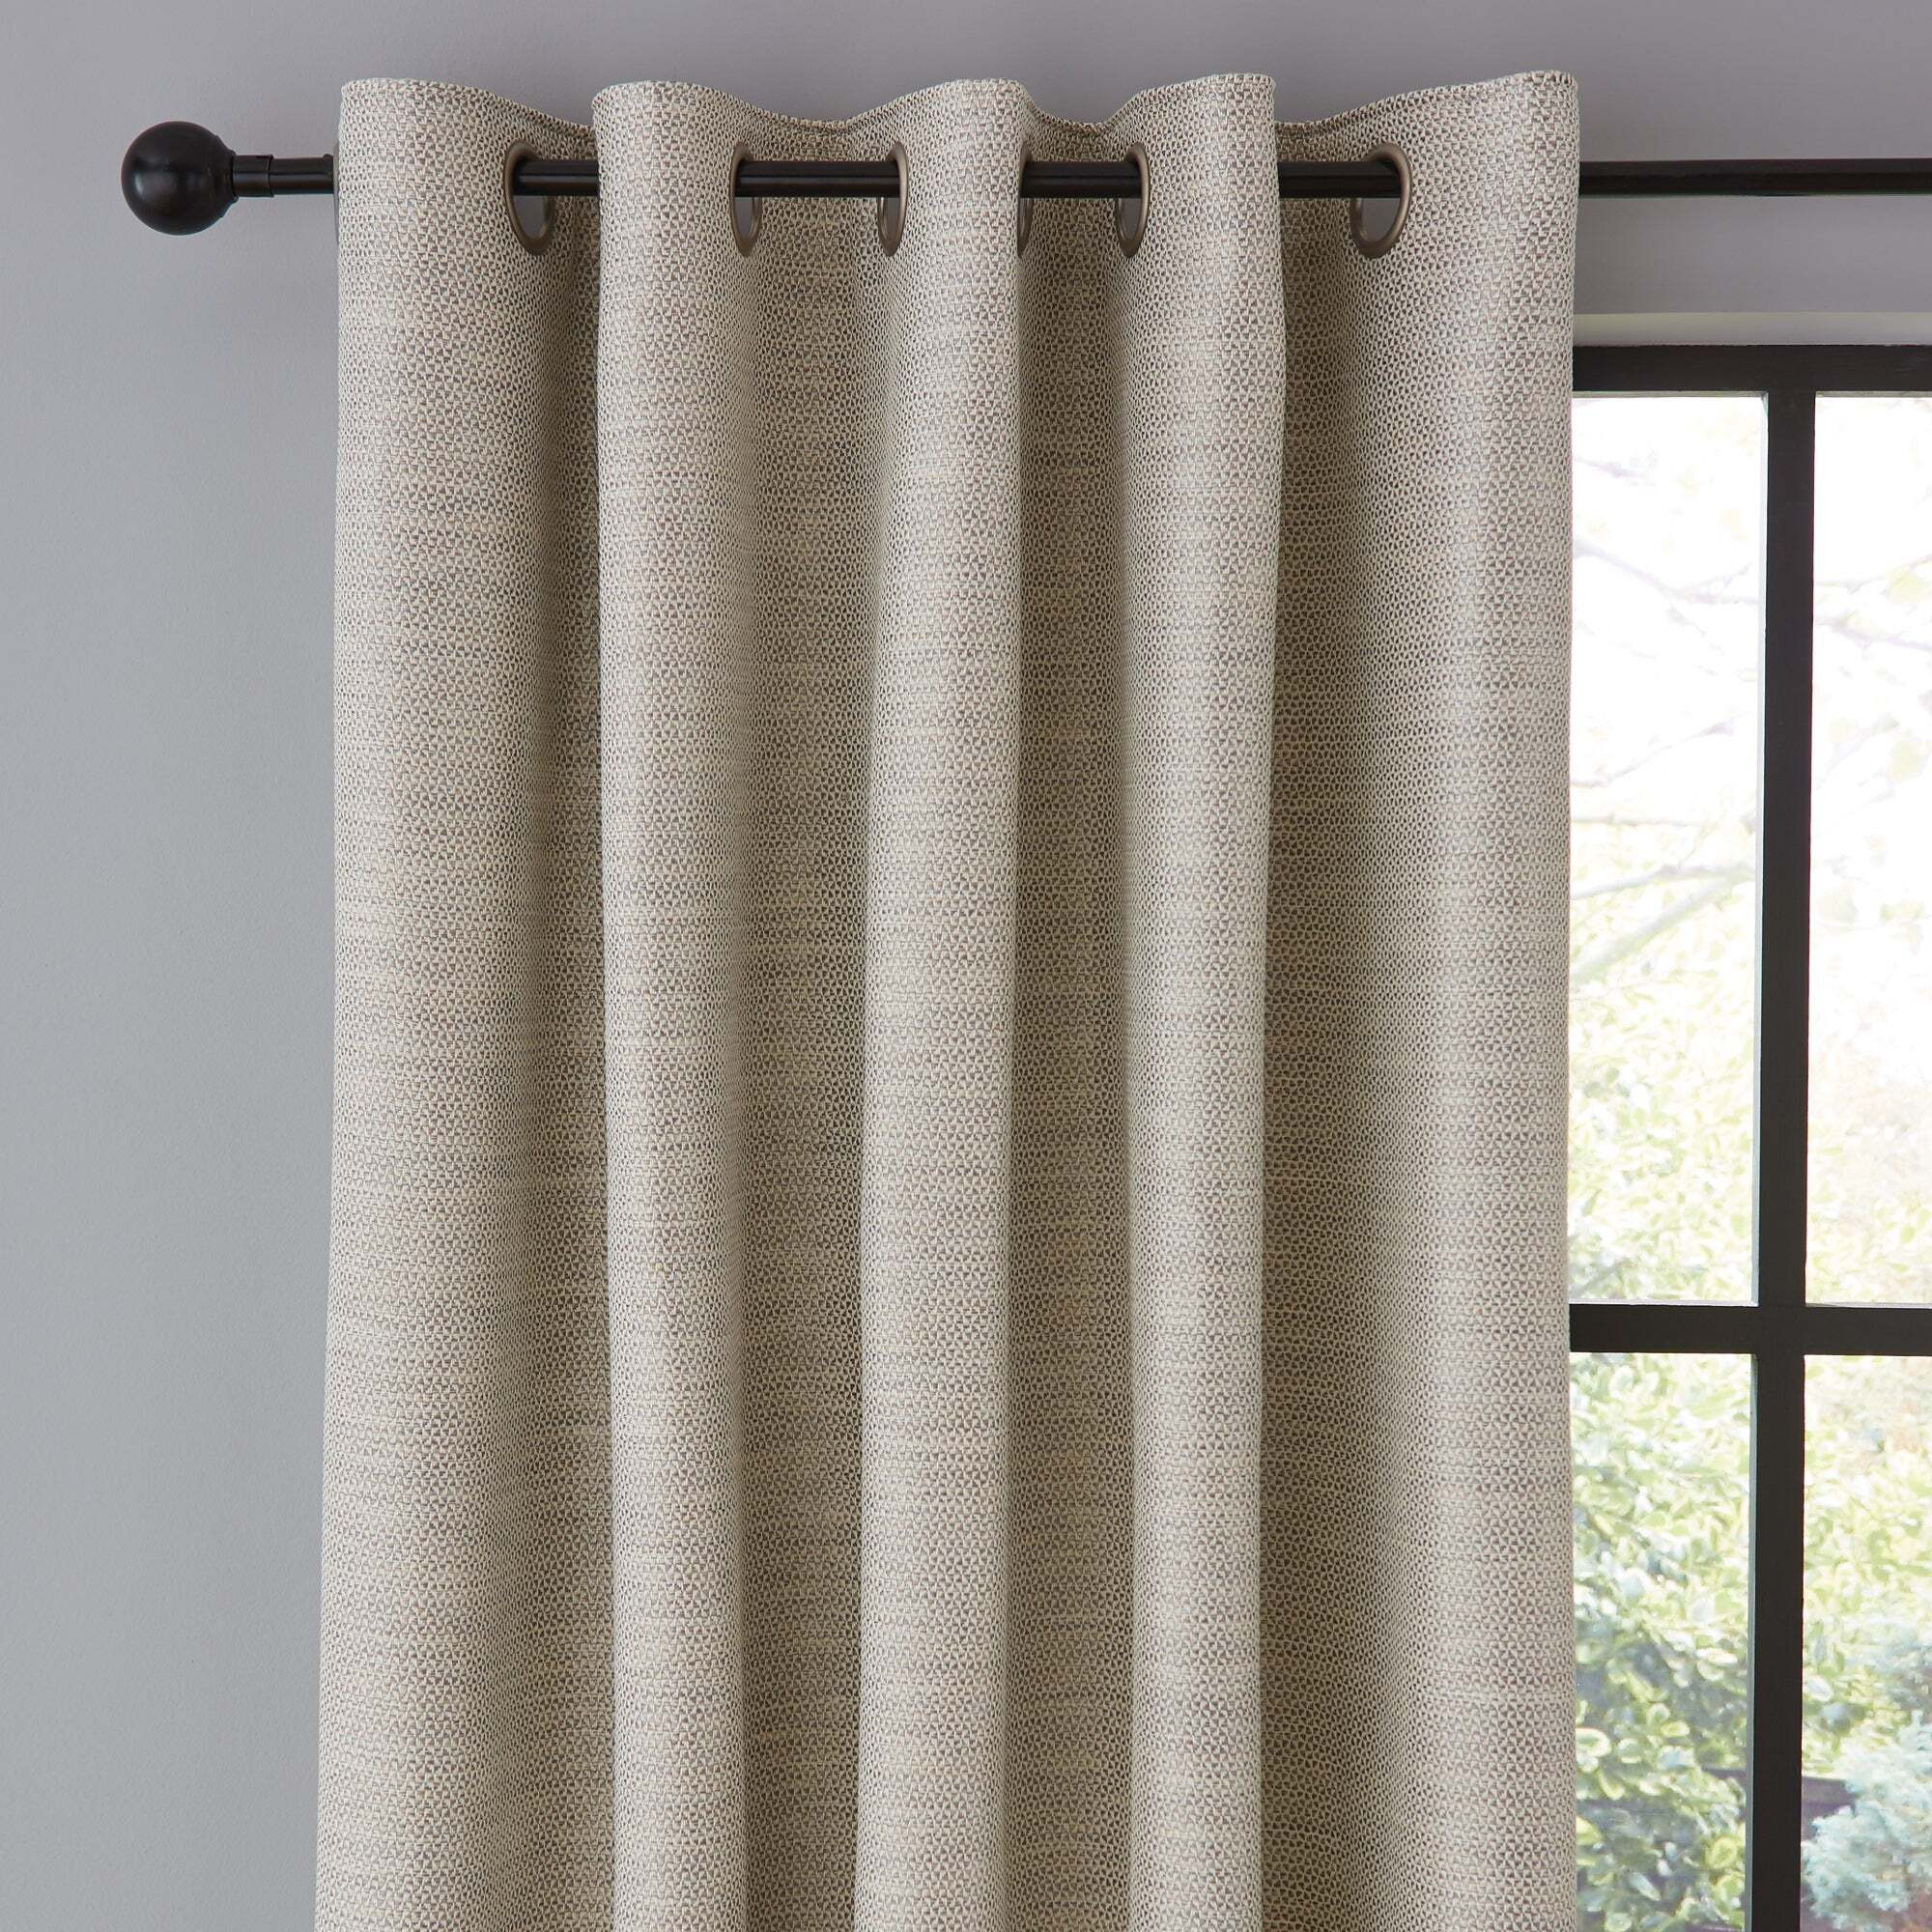 Harper Grey Eyelet Curtains Grey, Brown and White